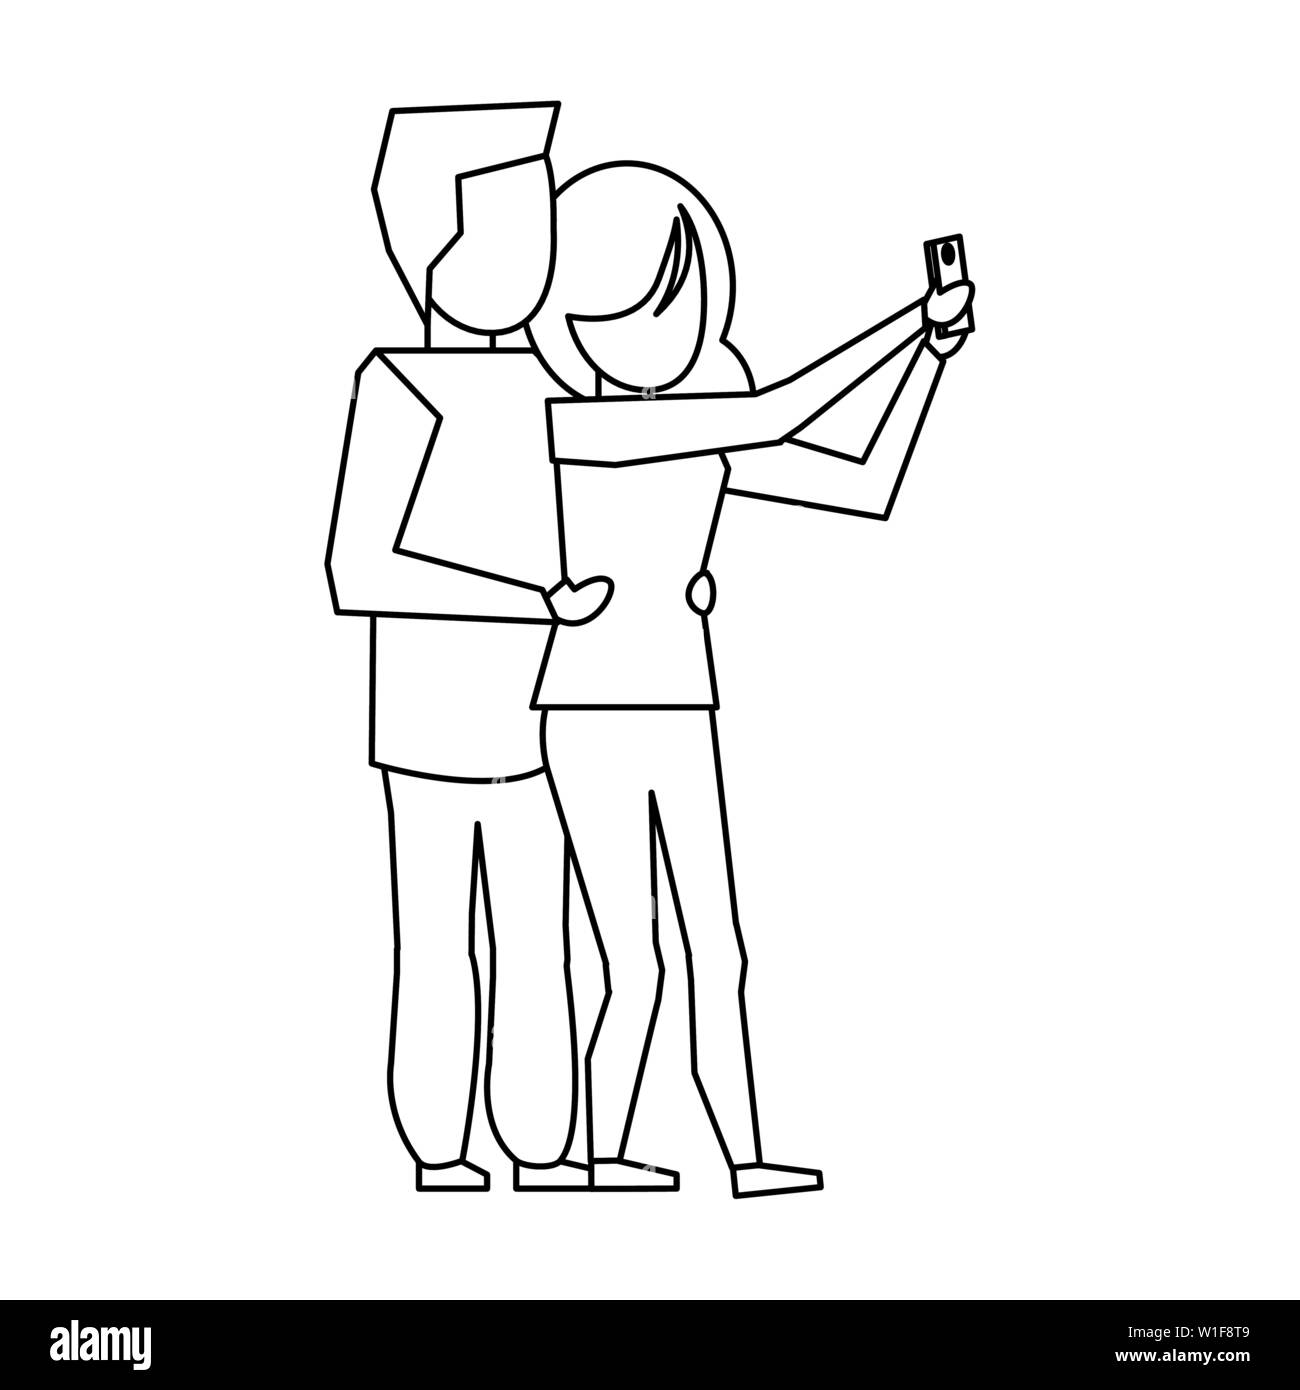 Young couple avatar faceless in black and white Stock Vector